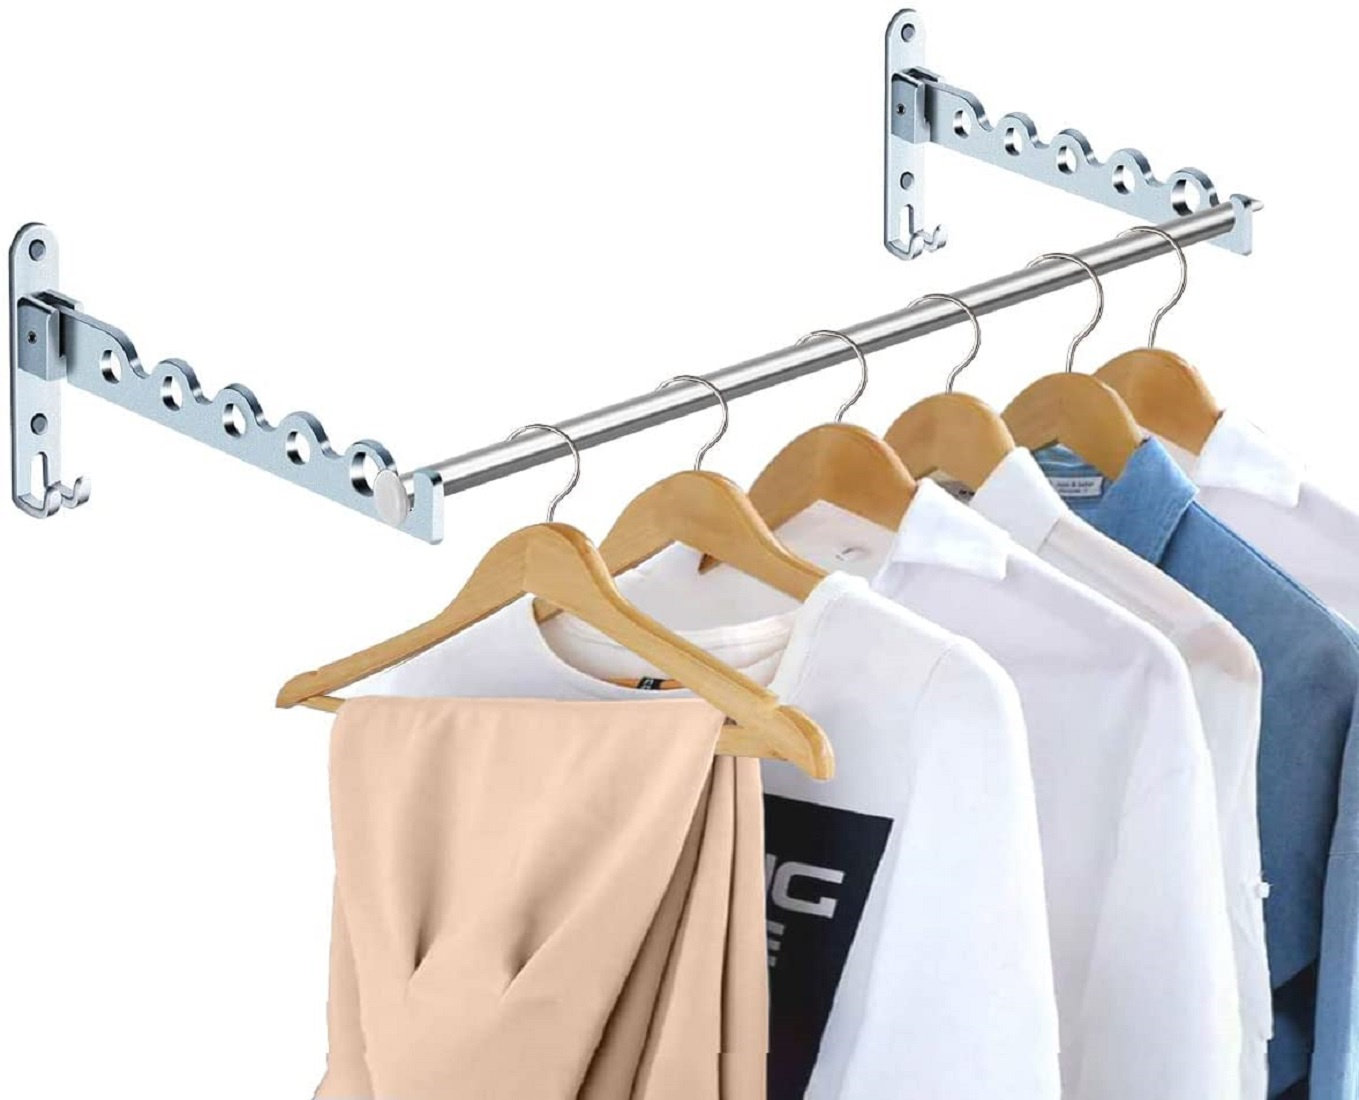 Laundry Room Wall Mount Clothes Hanger Rack Closet Storage Organizations 